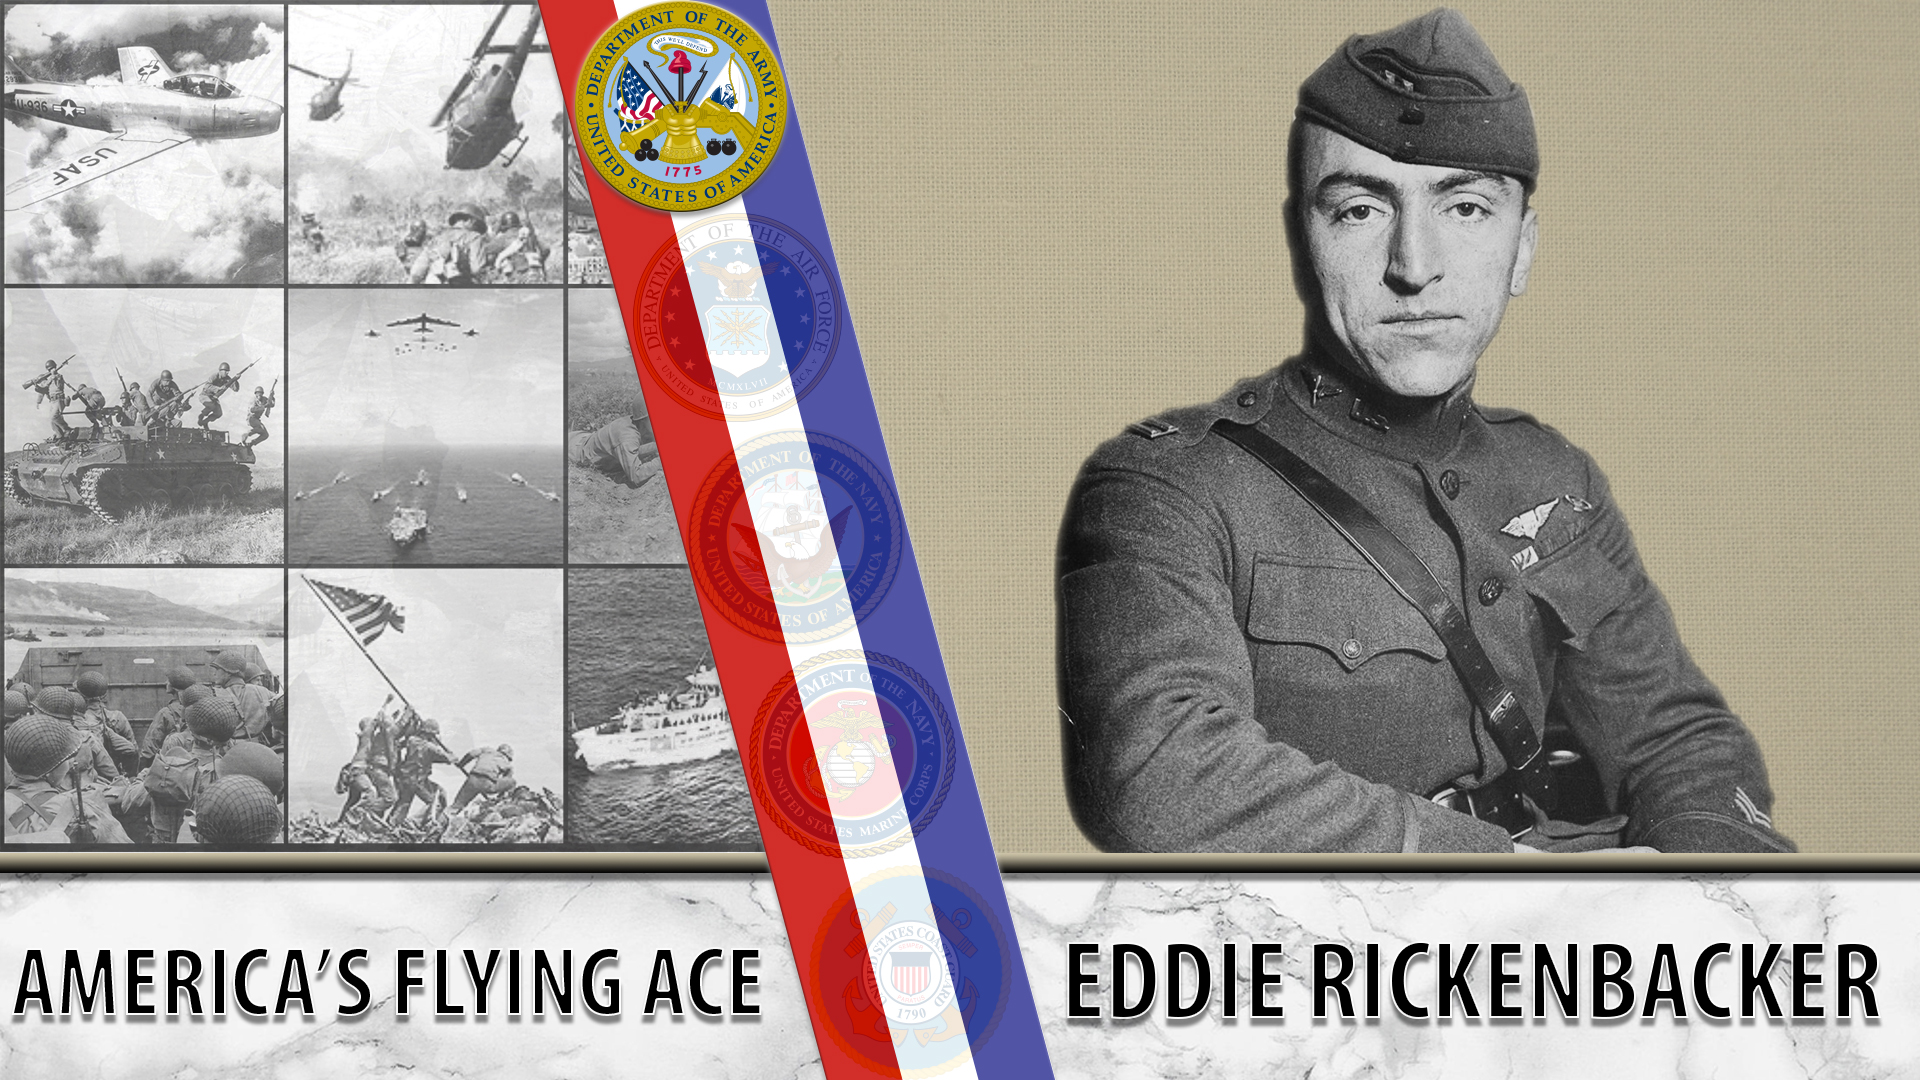 Time 4/17/1950-Eddie Rickenbacker cover & story-WWI ace fighter